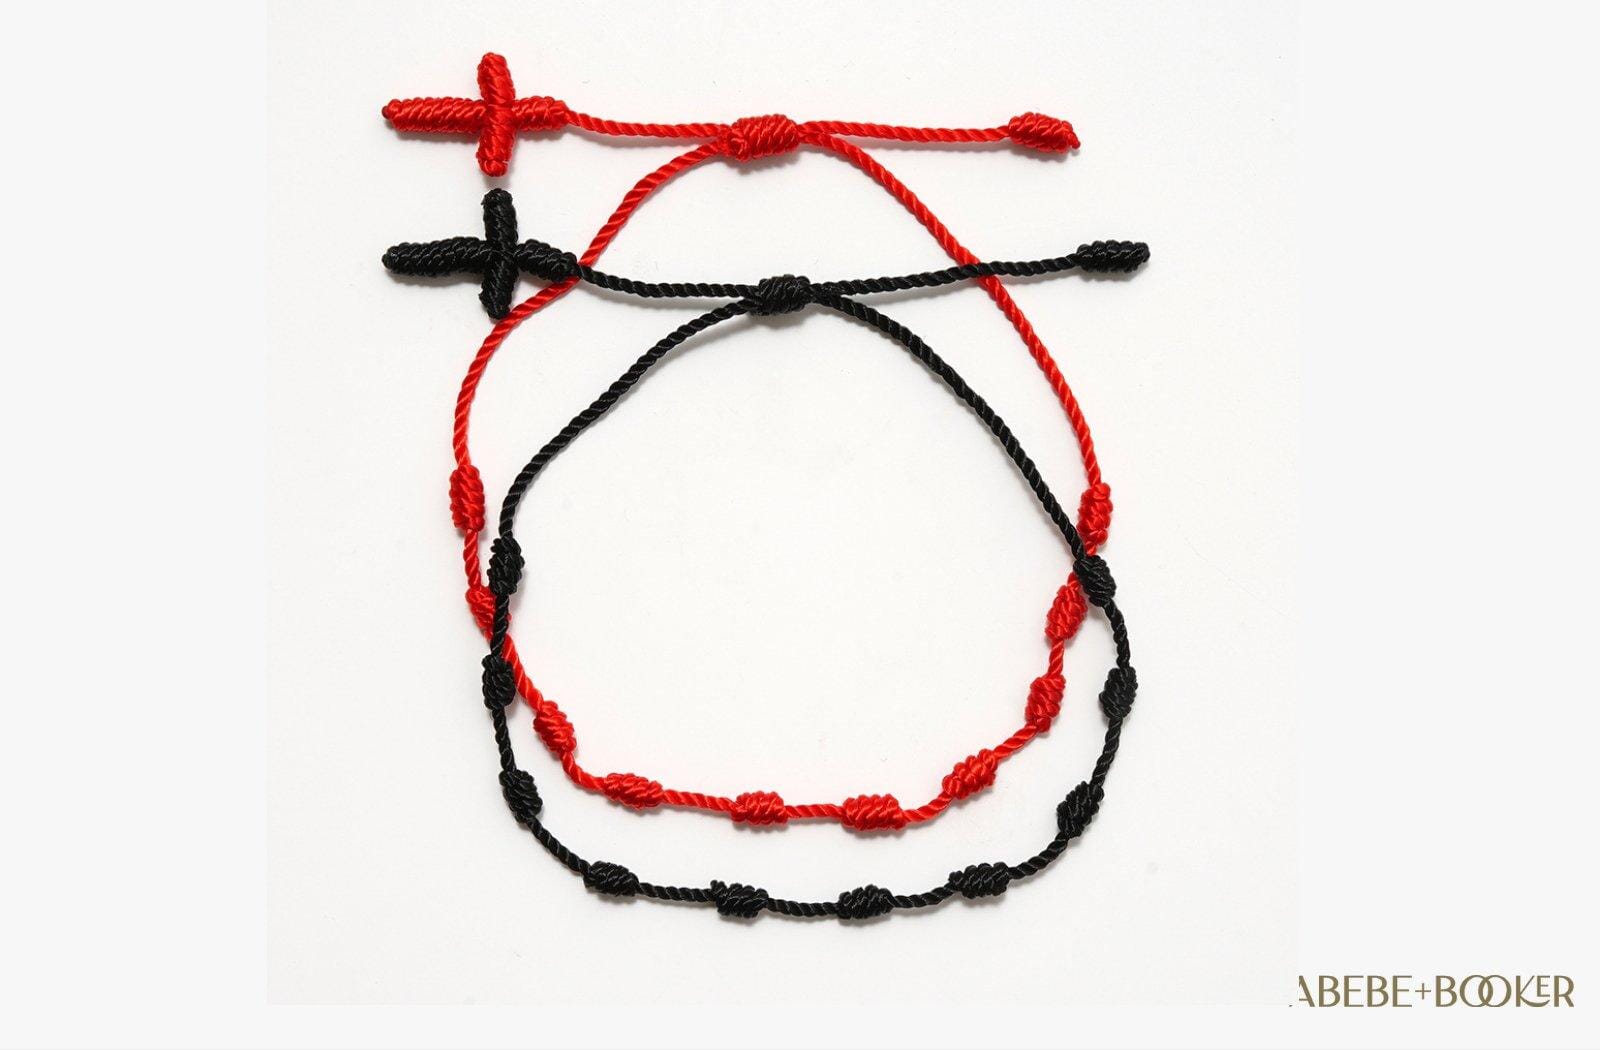 https://abebebooker.com/cdn/shop/articles/unraveling-the-mystery-the-meaning-behind-the-7-knot-red-bracelet-abebe-booker_b1d4434c-82f5-41a3-85bf-bff5f6c74c31.jpg?v=1688658497